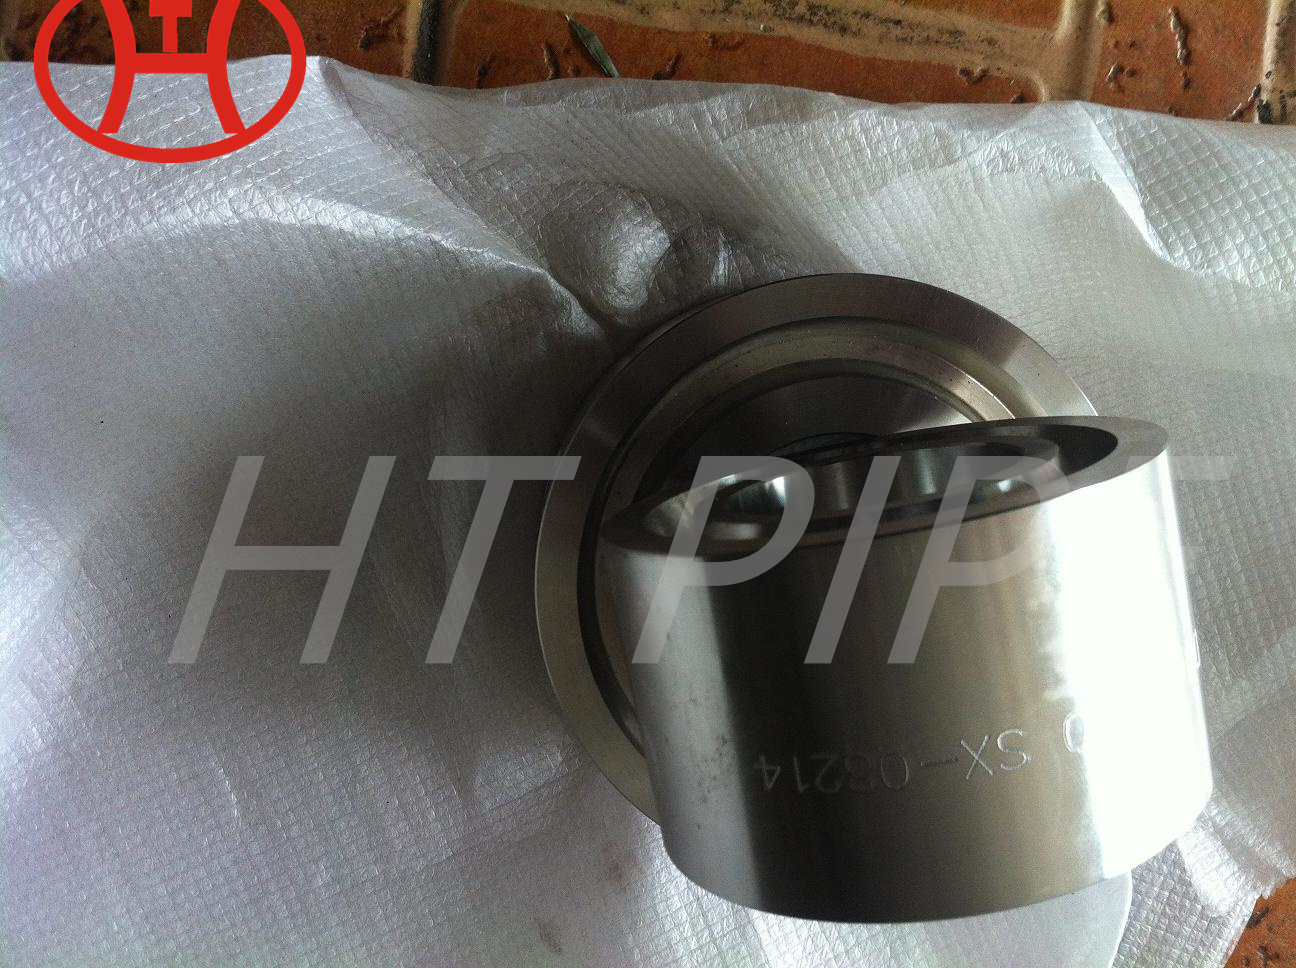 ASME B16.5 Alloy Steel Flange the high alloy or low alloy flanges